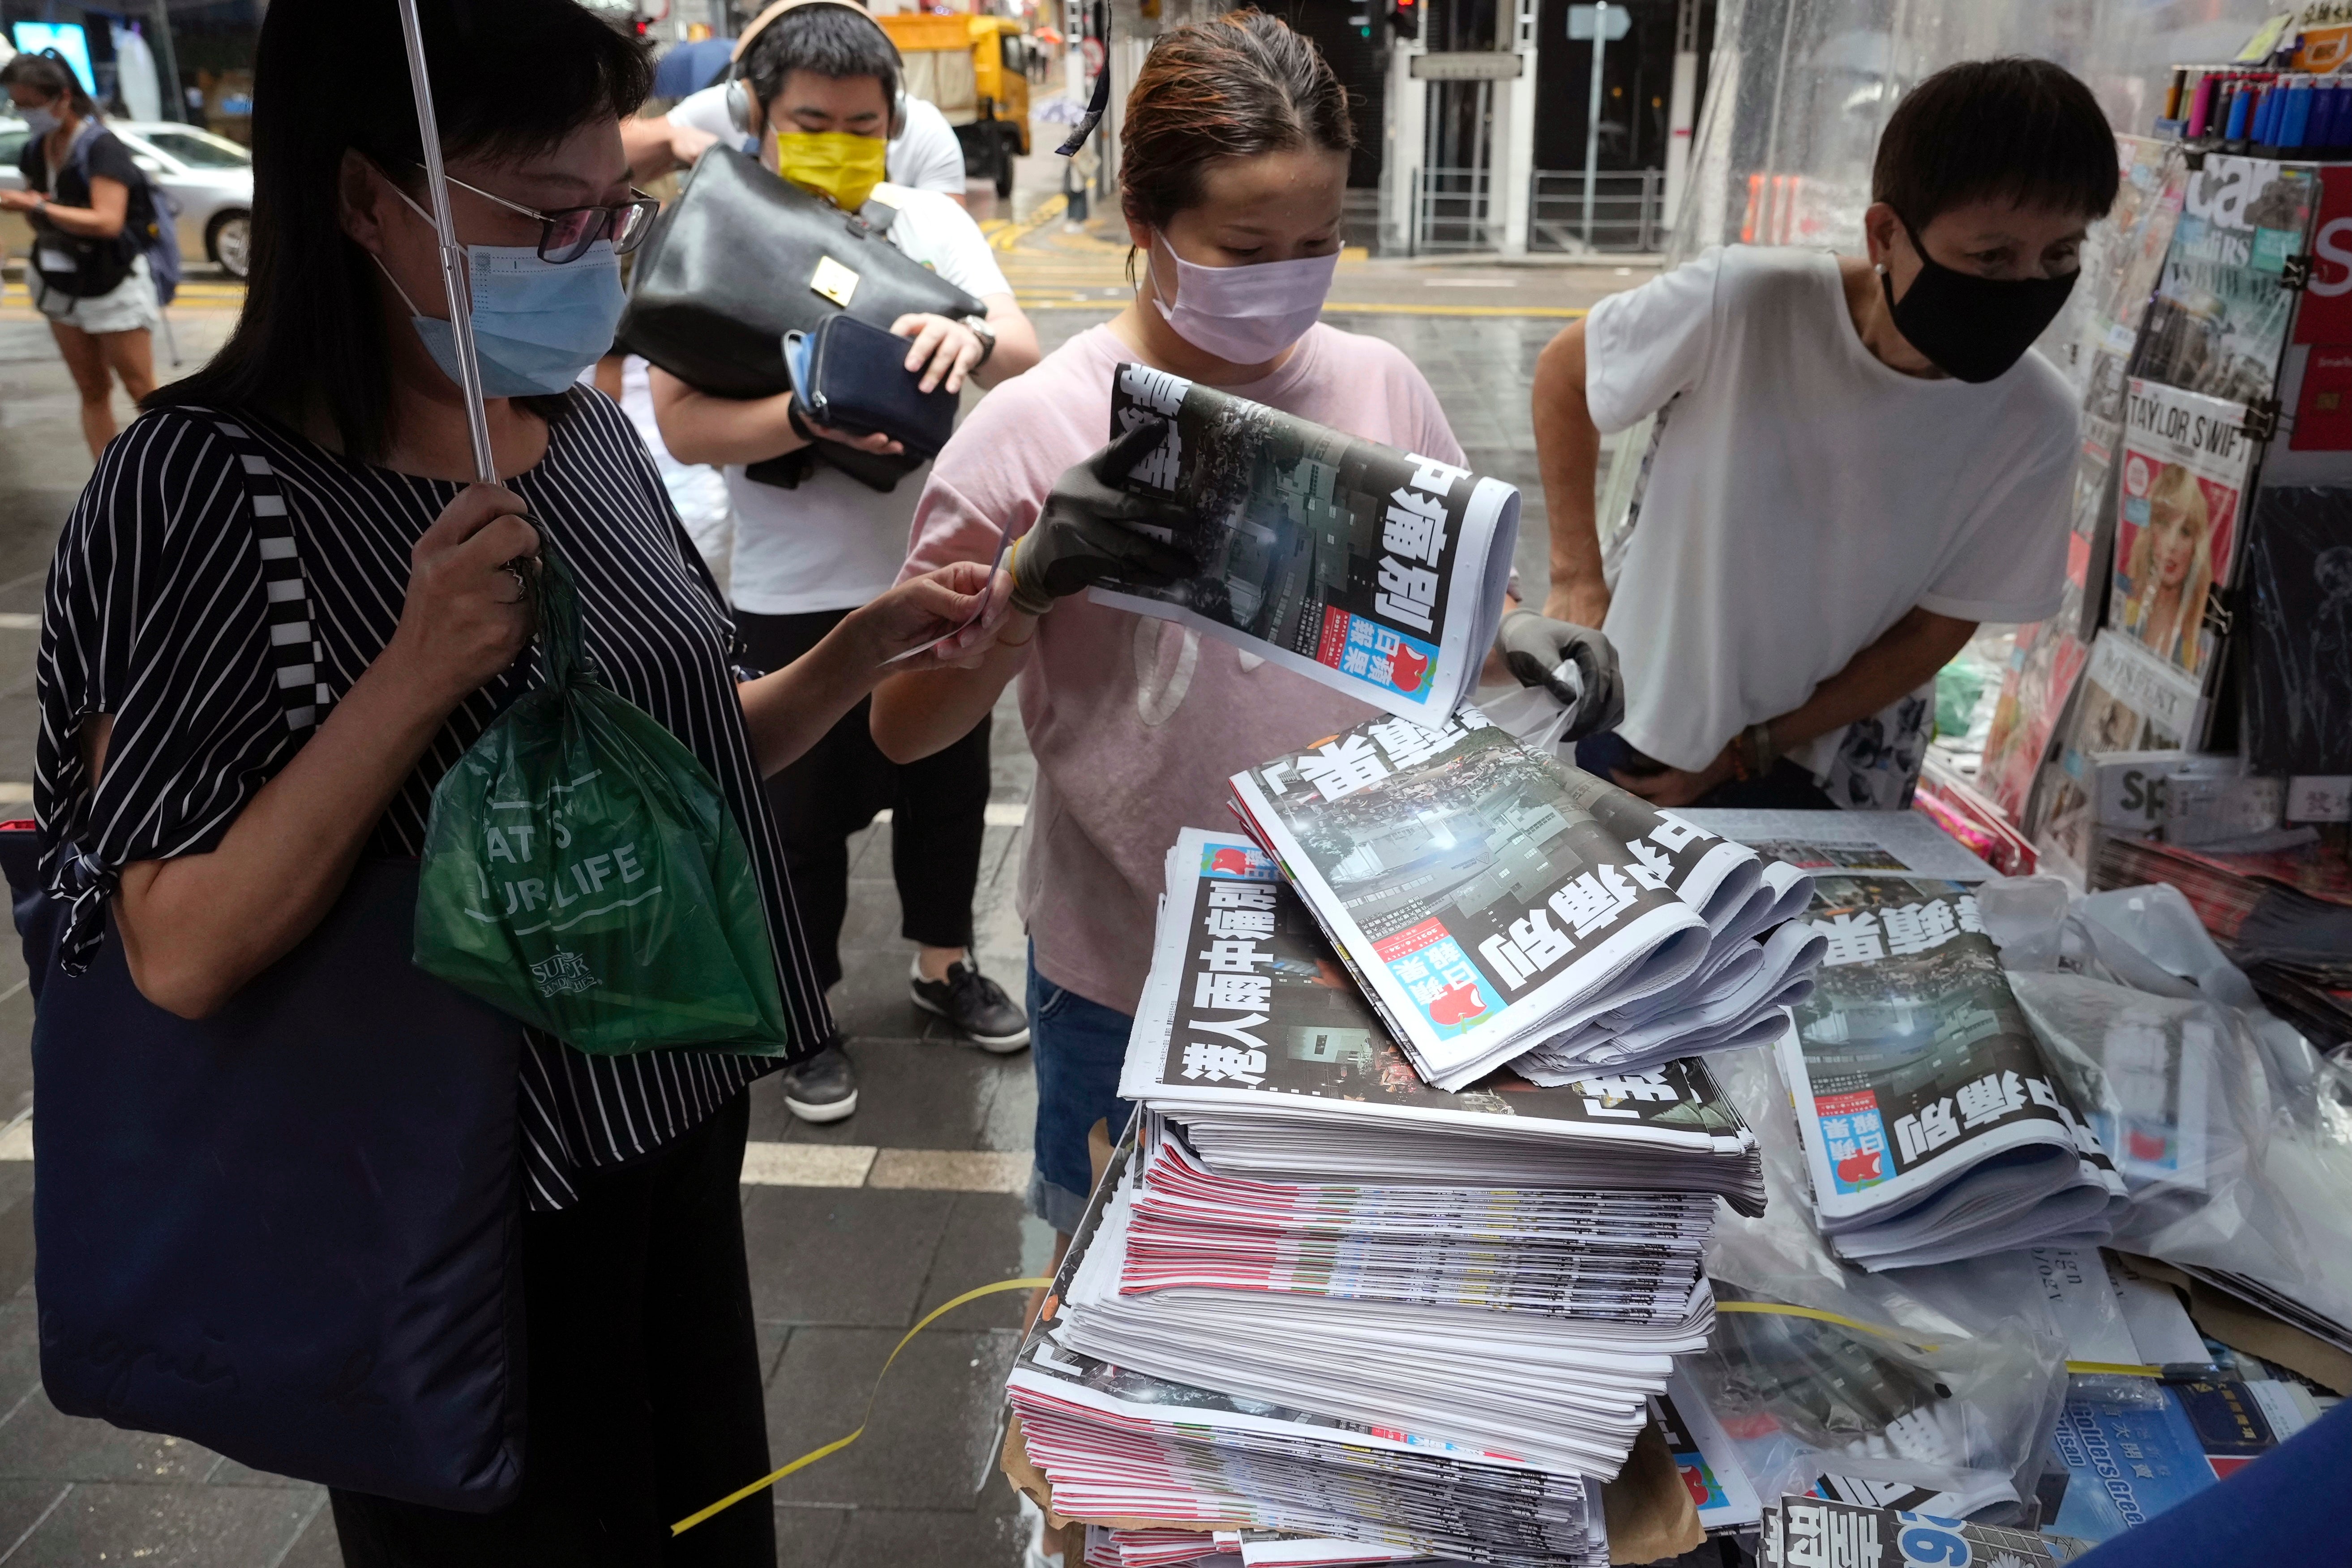 People queue up to buy last issue of Apple Daily at a newspaper booth at a downtown street in Hong Kong on 24 June 2021. Six former executives of Apple Daily pleaded guilty to a collusion charge